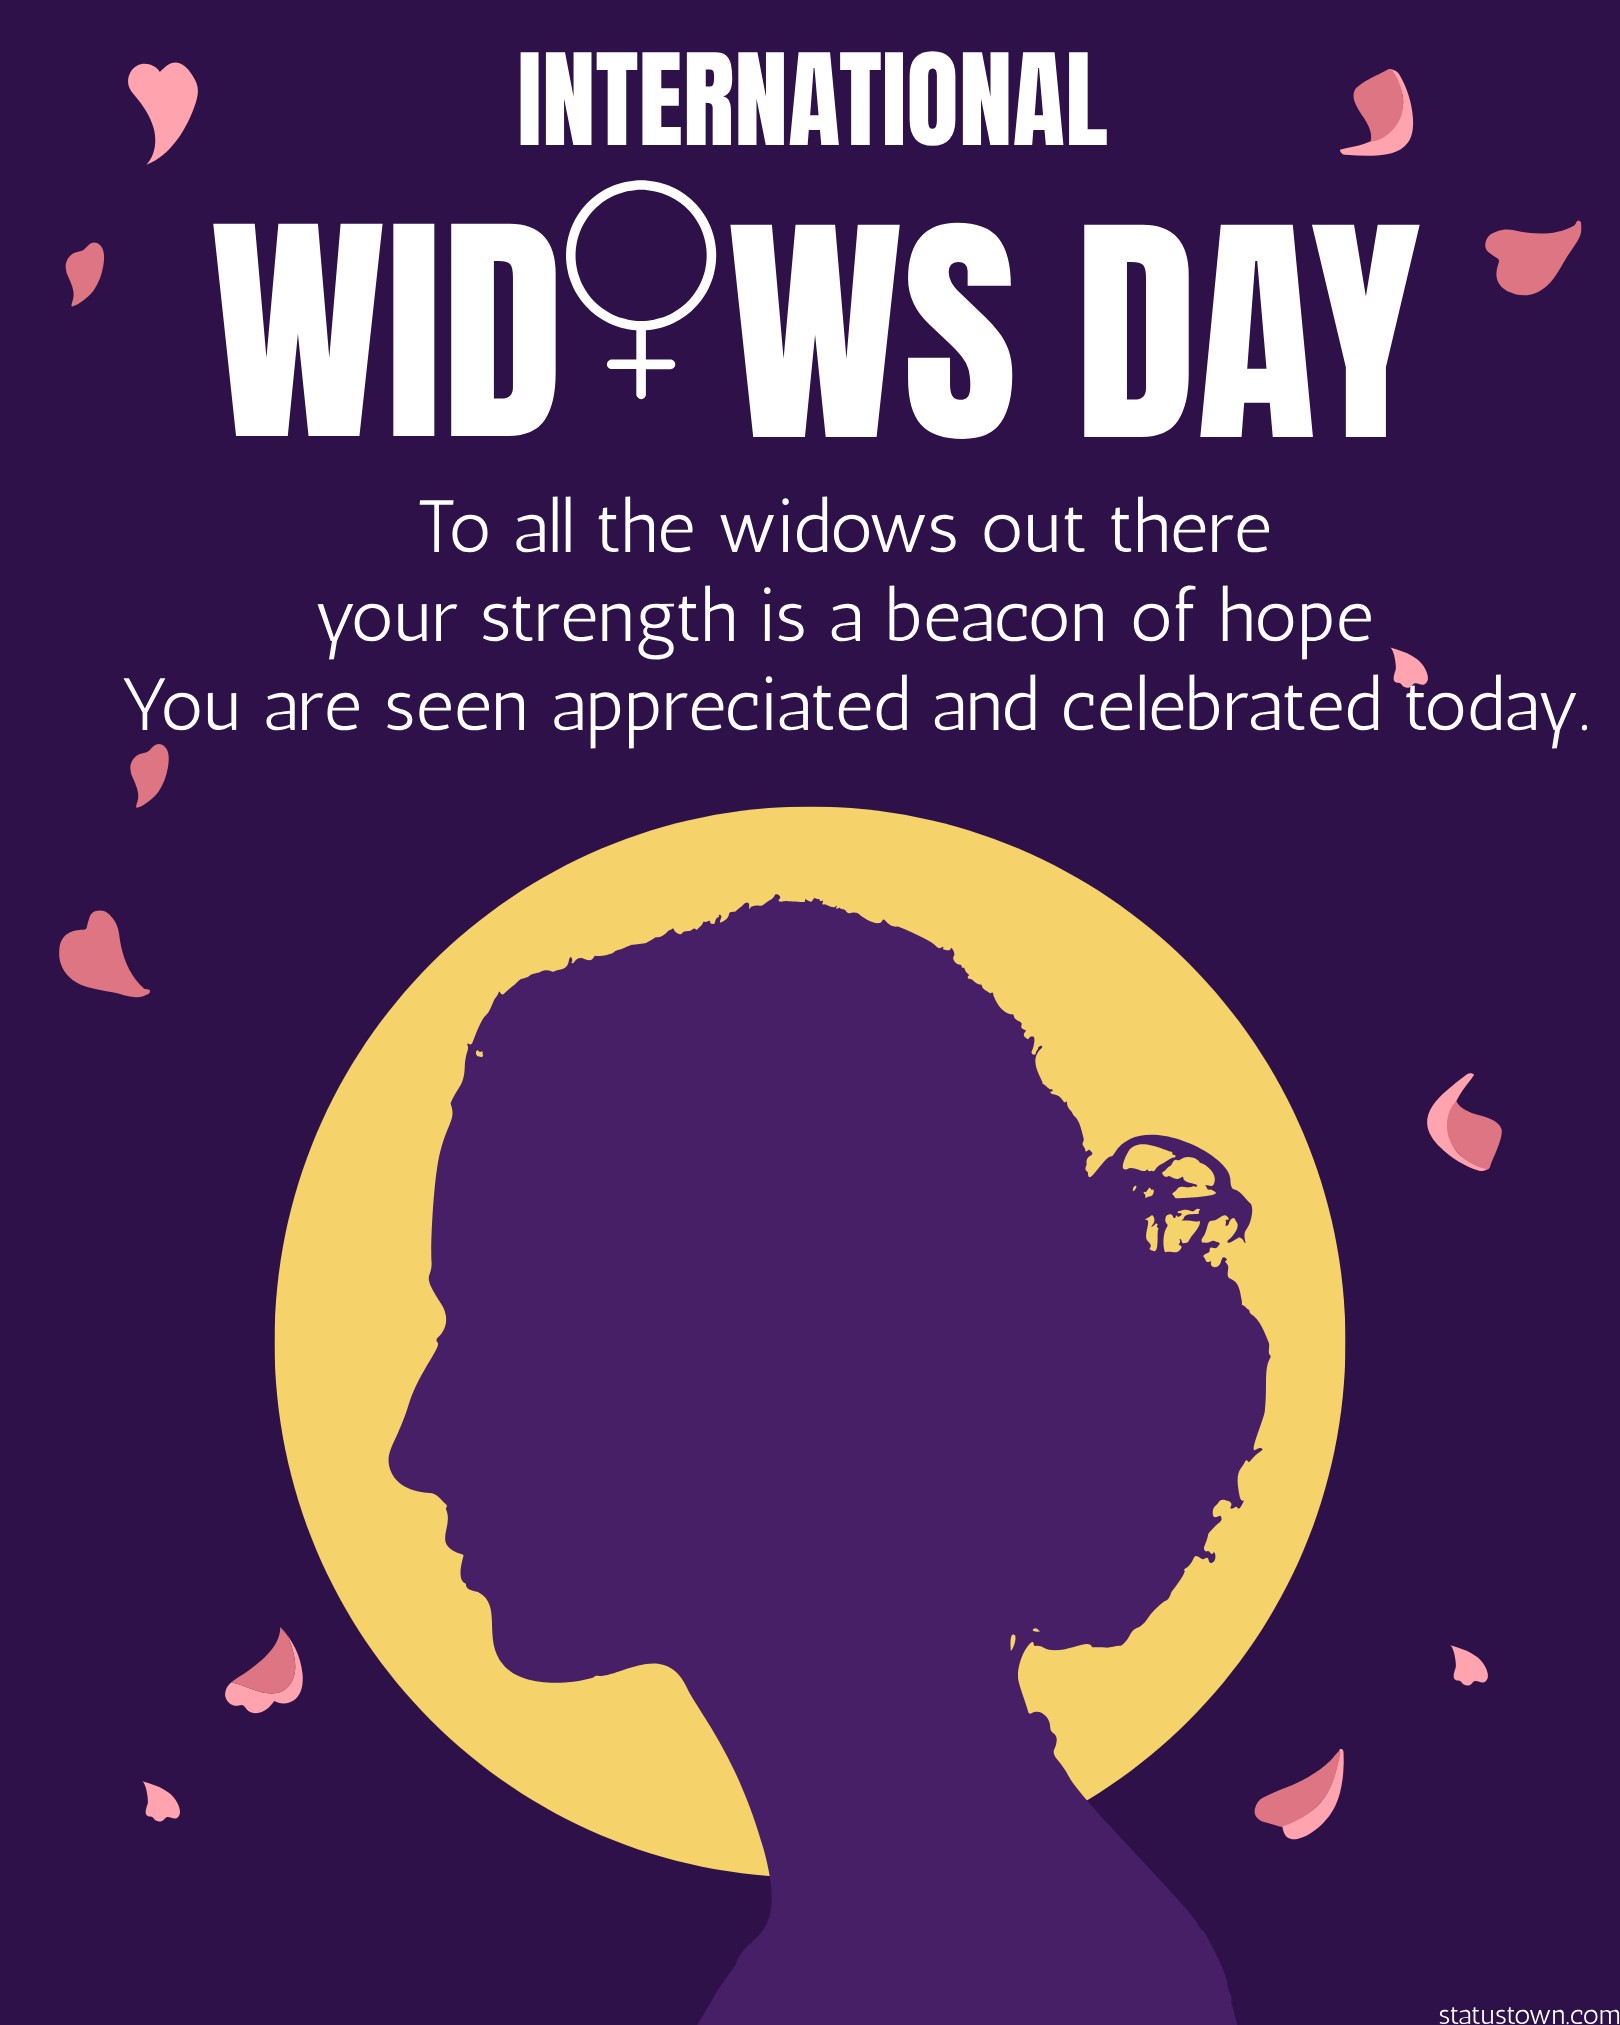 To all the widows out there, your strength is a beacon of hope. You are seen, appreciated, and celebrated today. - International Widows Day wishes, messages, and status